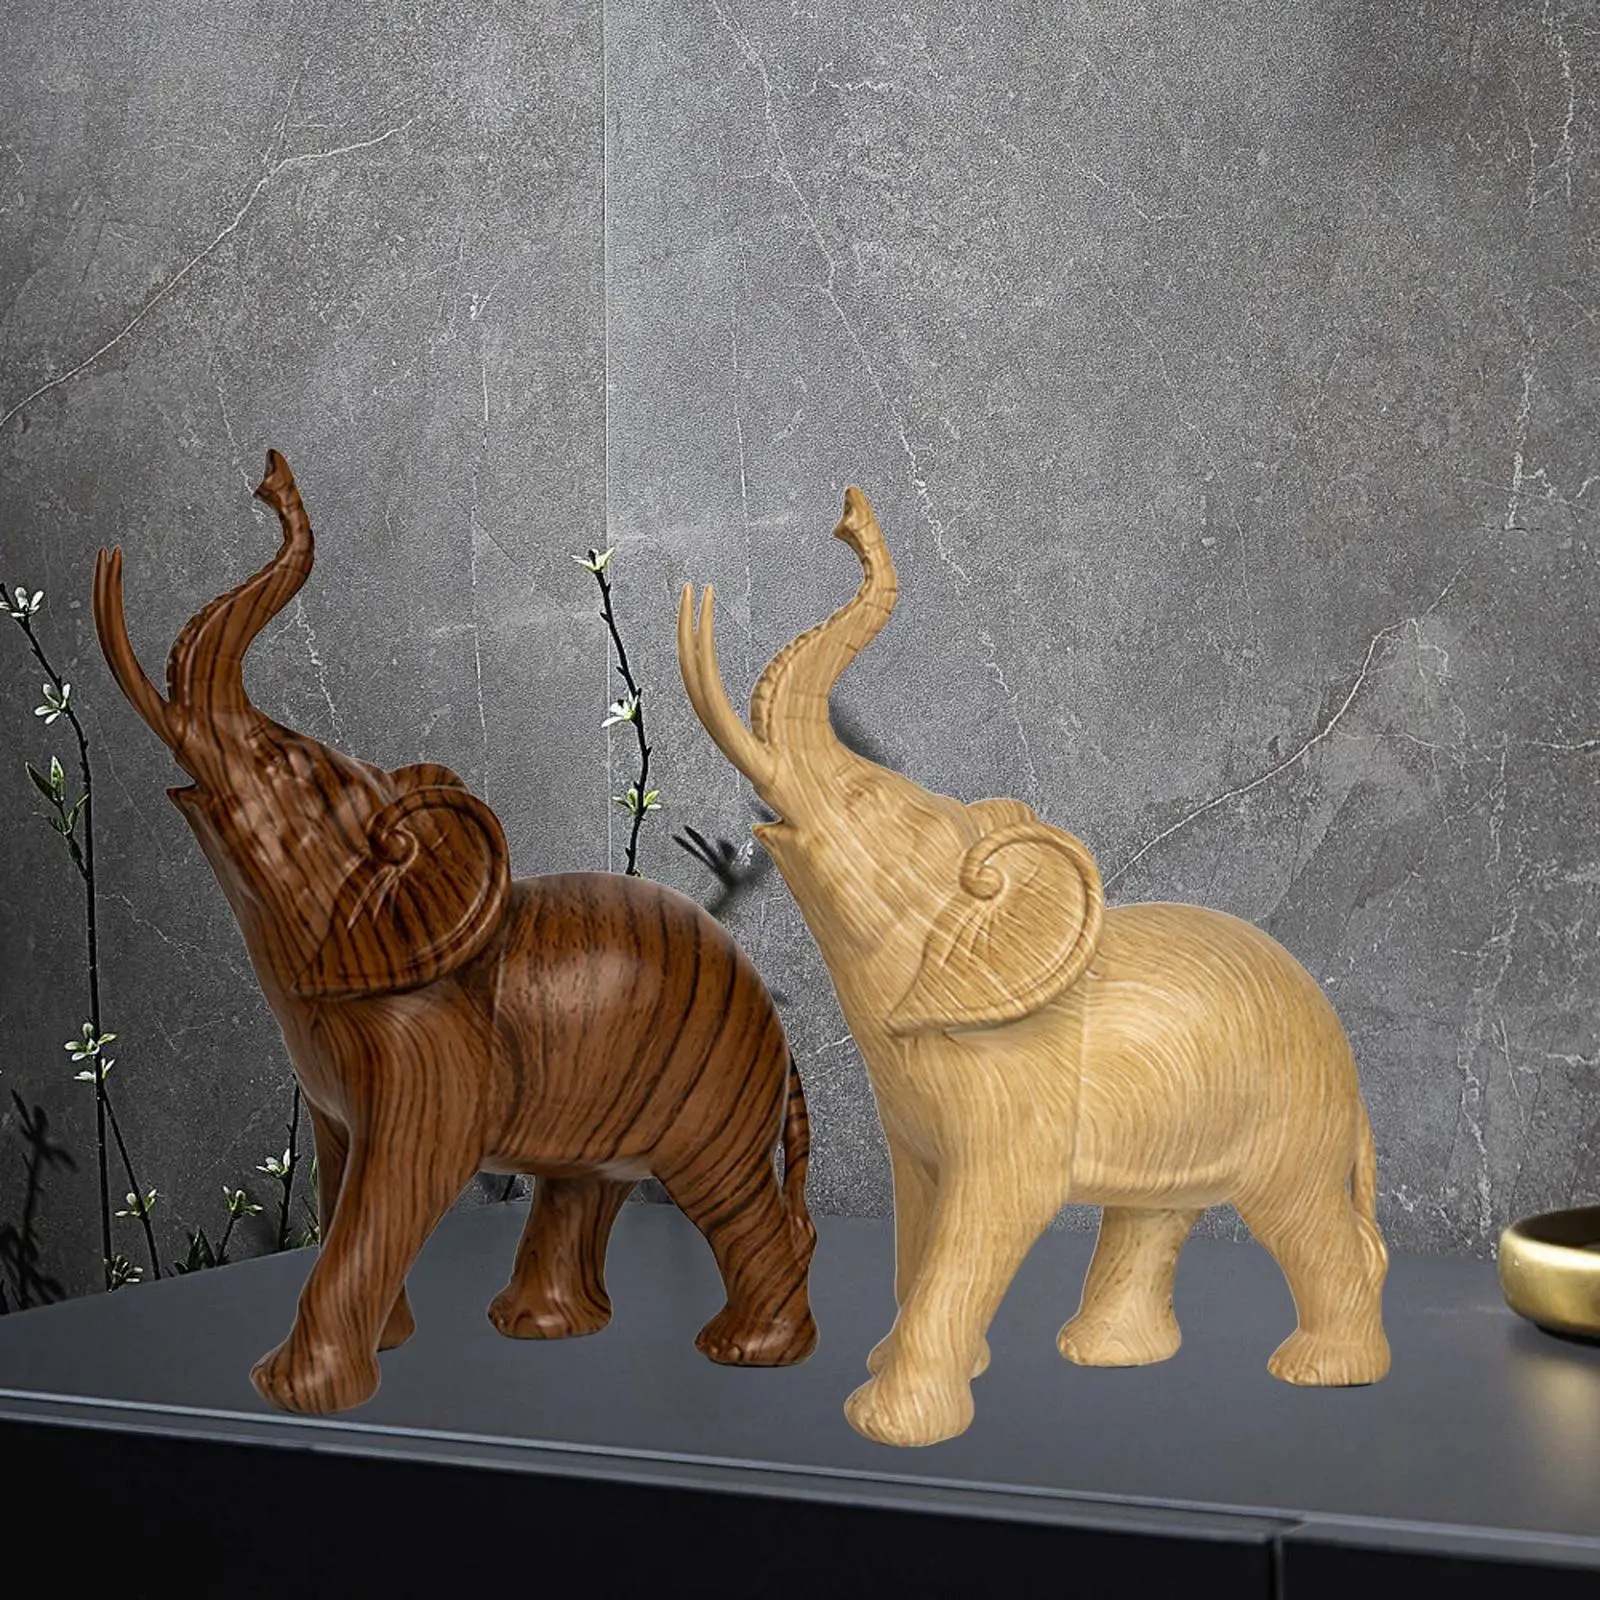 Rustic Elephant Statues Sculptures Ornament Desktop Table Centerpiece Resin Figurines for Sill Office Home Living Room Bedroom